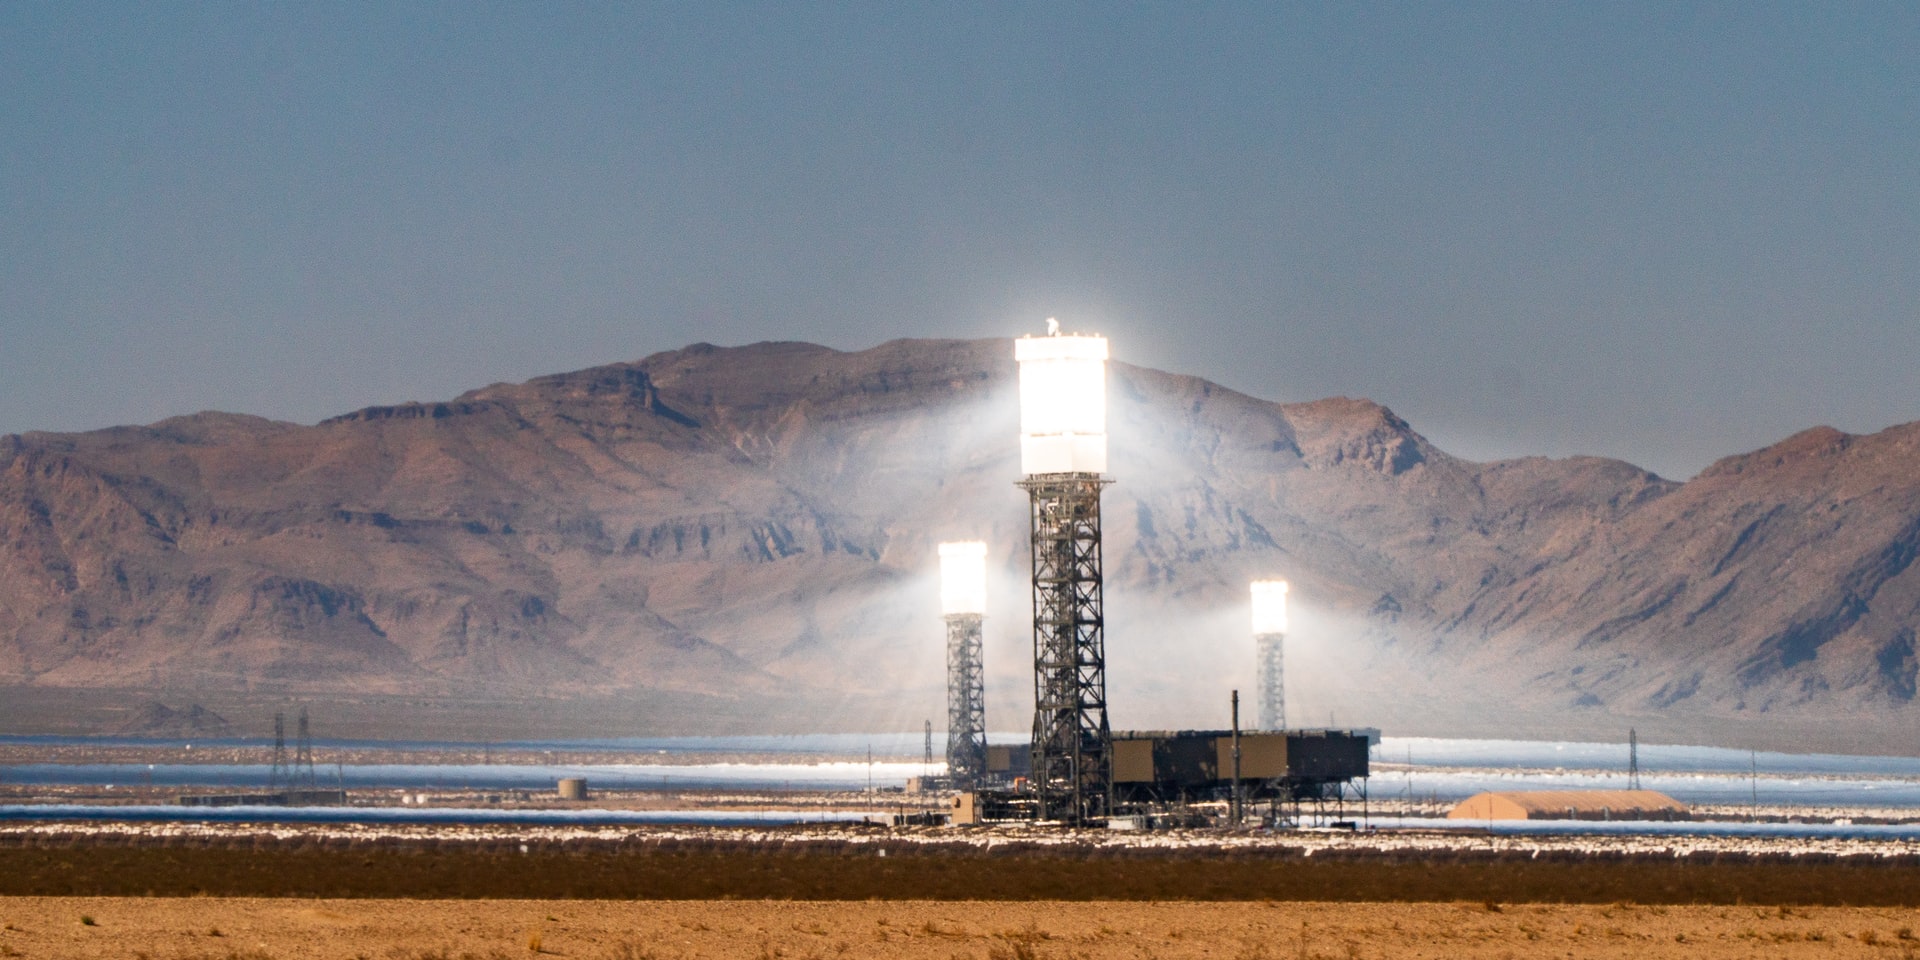 In order to meet climate goals, the U.S. must replace fossil fuels with renewable energy sources — such as solar — and also generate much more power so that we can electrify the transportation sector, homes and other buildings, and more. Pictured: Ivanpah Solar Electric Generating System, Nipton, CA, USA.